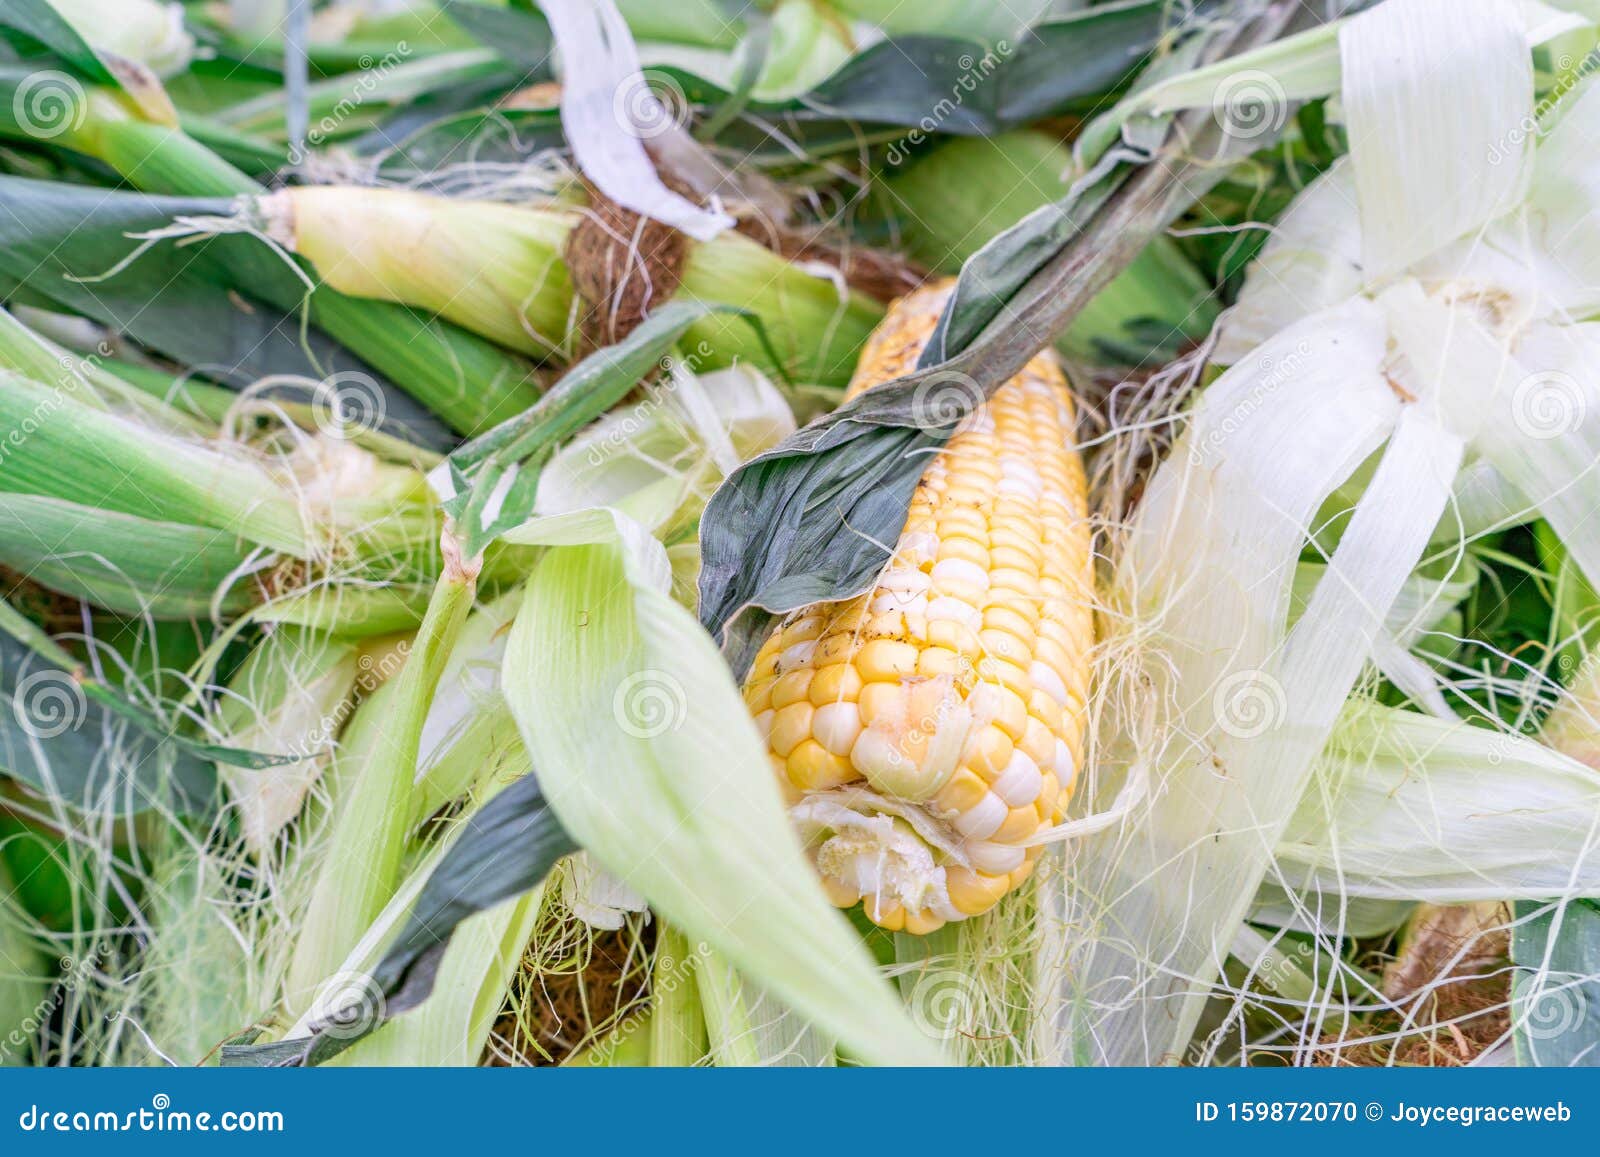 sweet corn on the cob, peeled, in a pile at a farmer`s market, with other unpeeled corn from a recent summer harvest